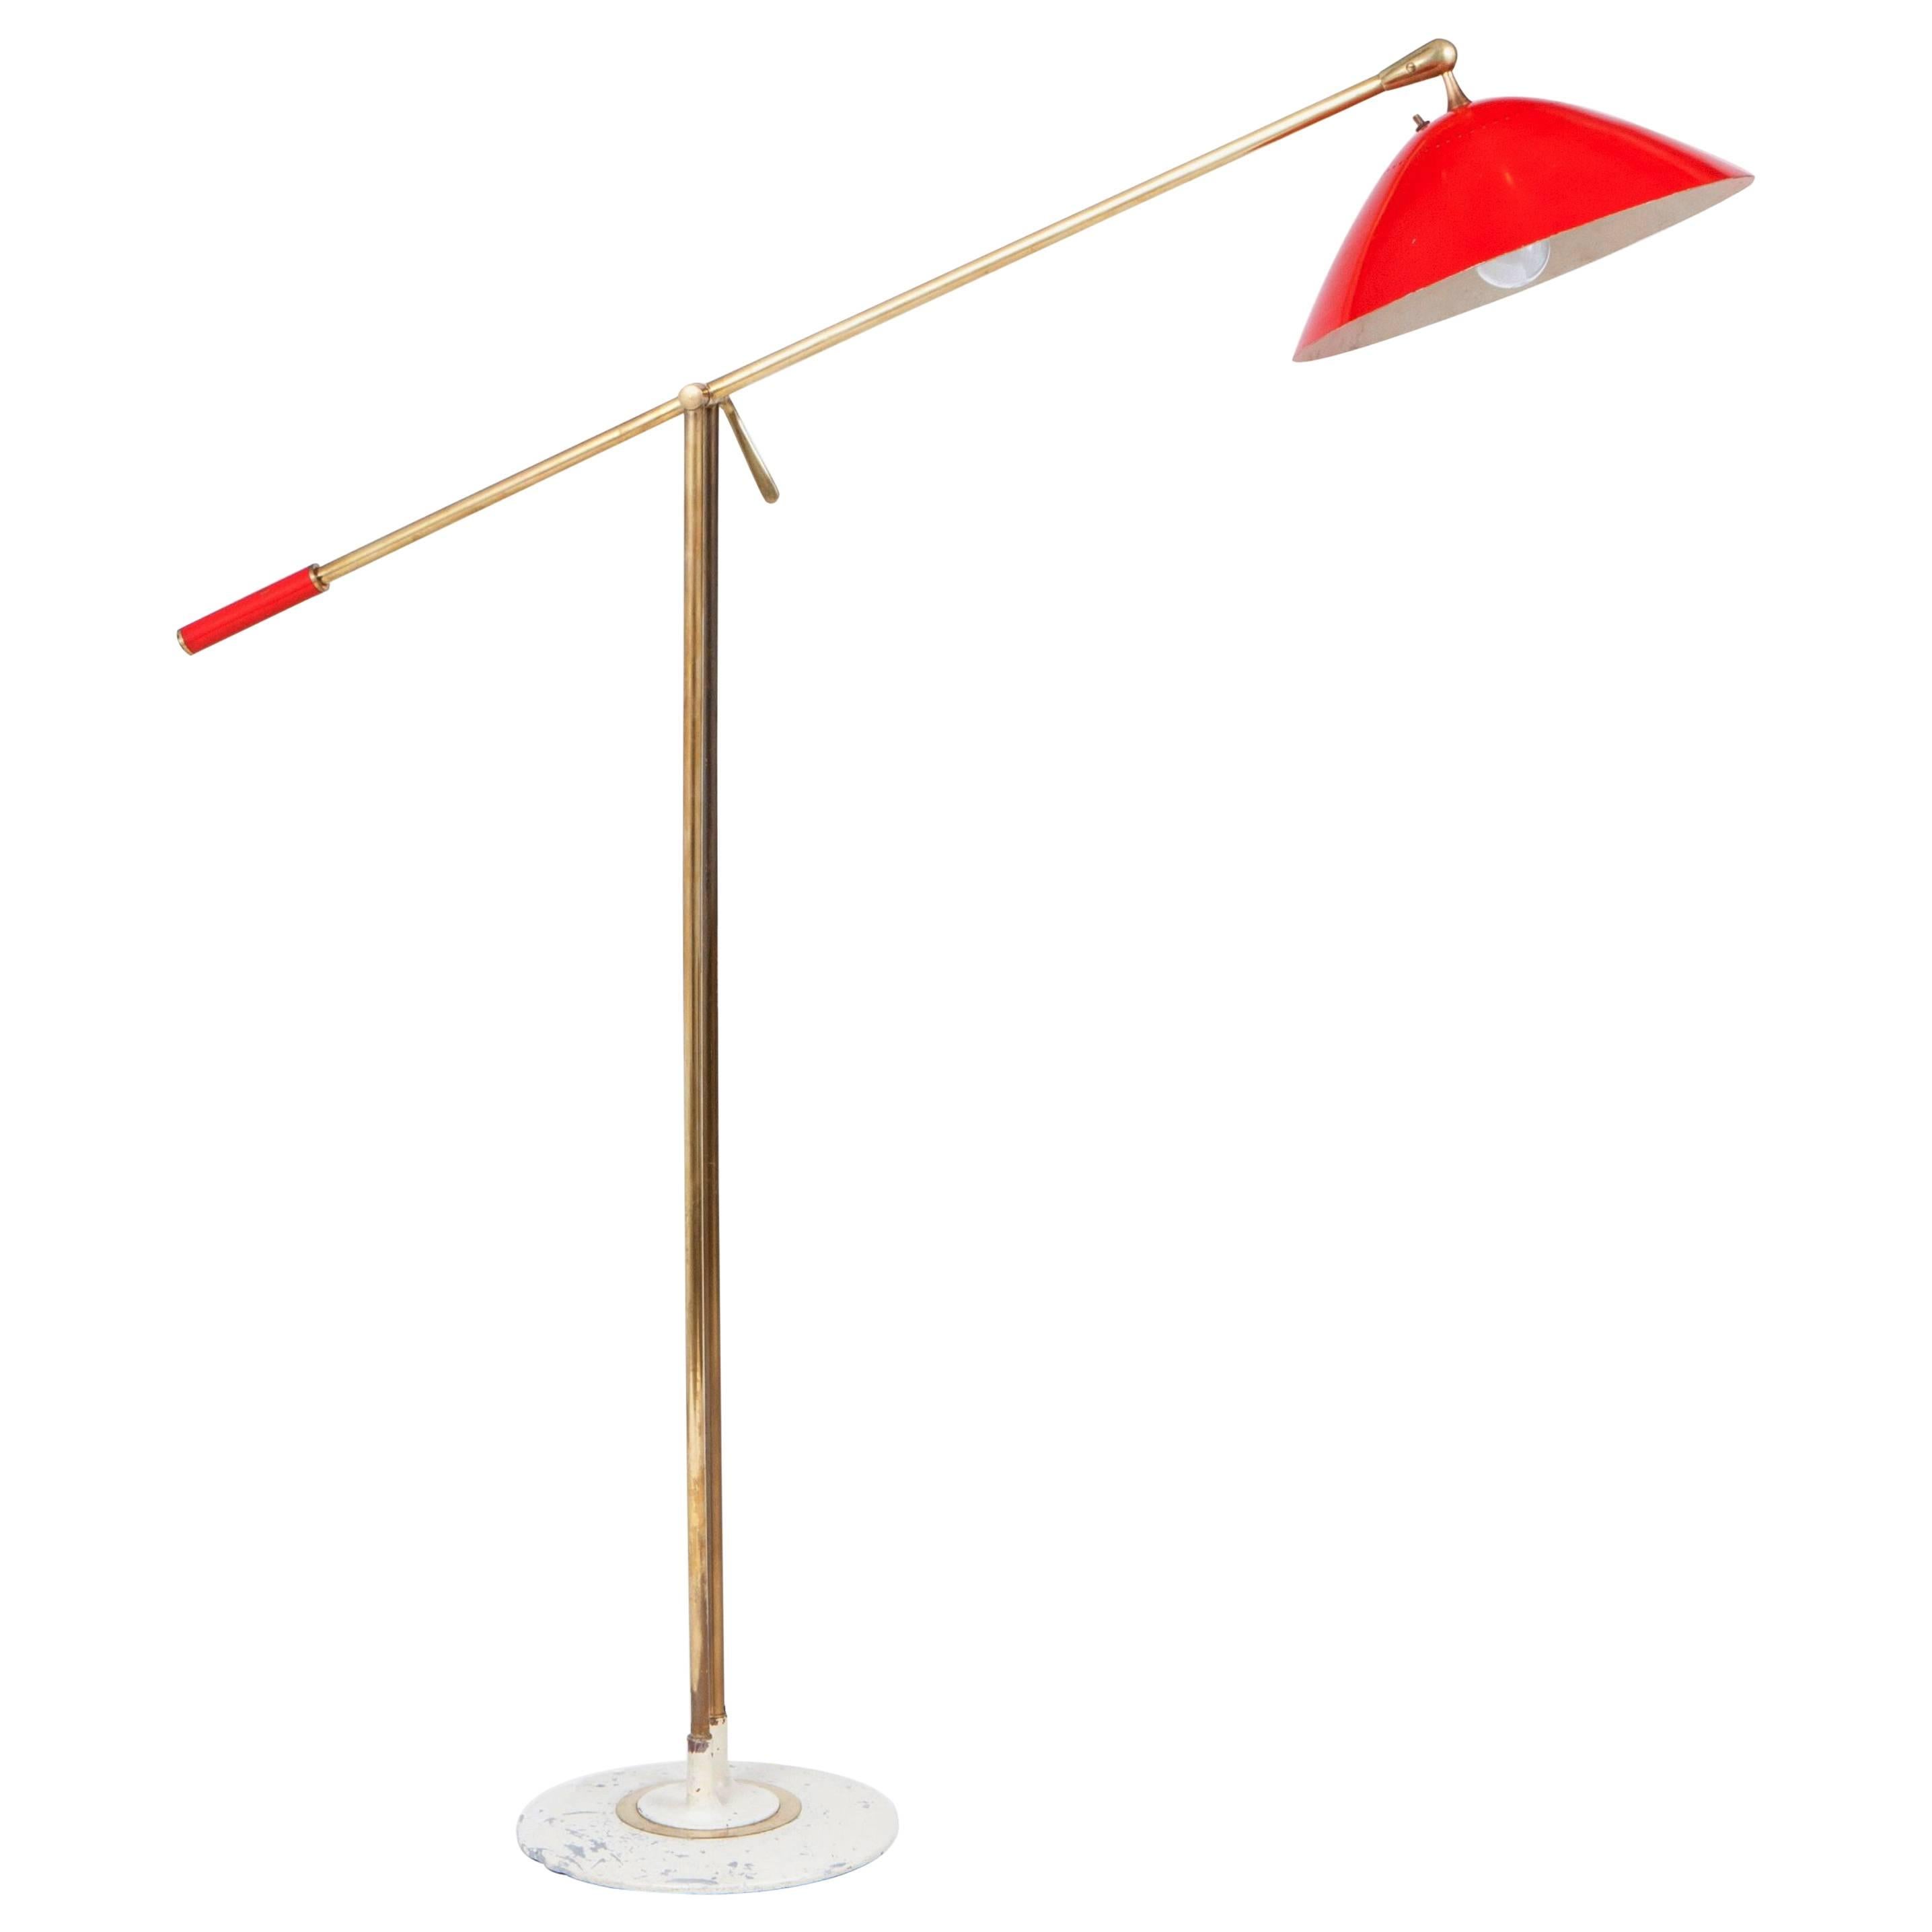 Stilnovo Italian Brass and Red Lacquer Adjustable Floor, Lamp, 1950s